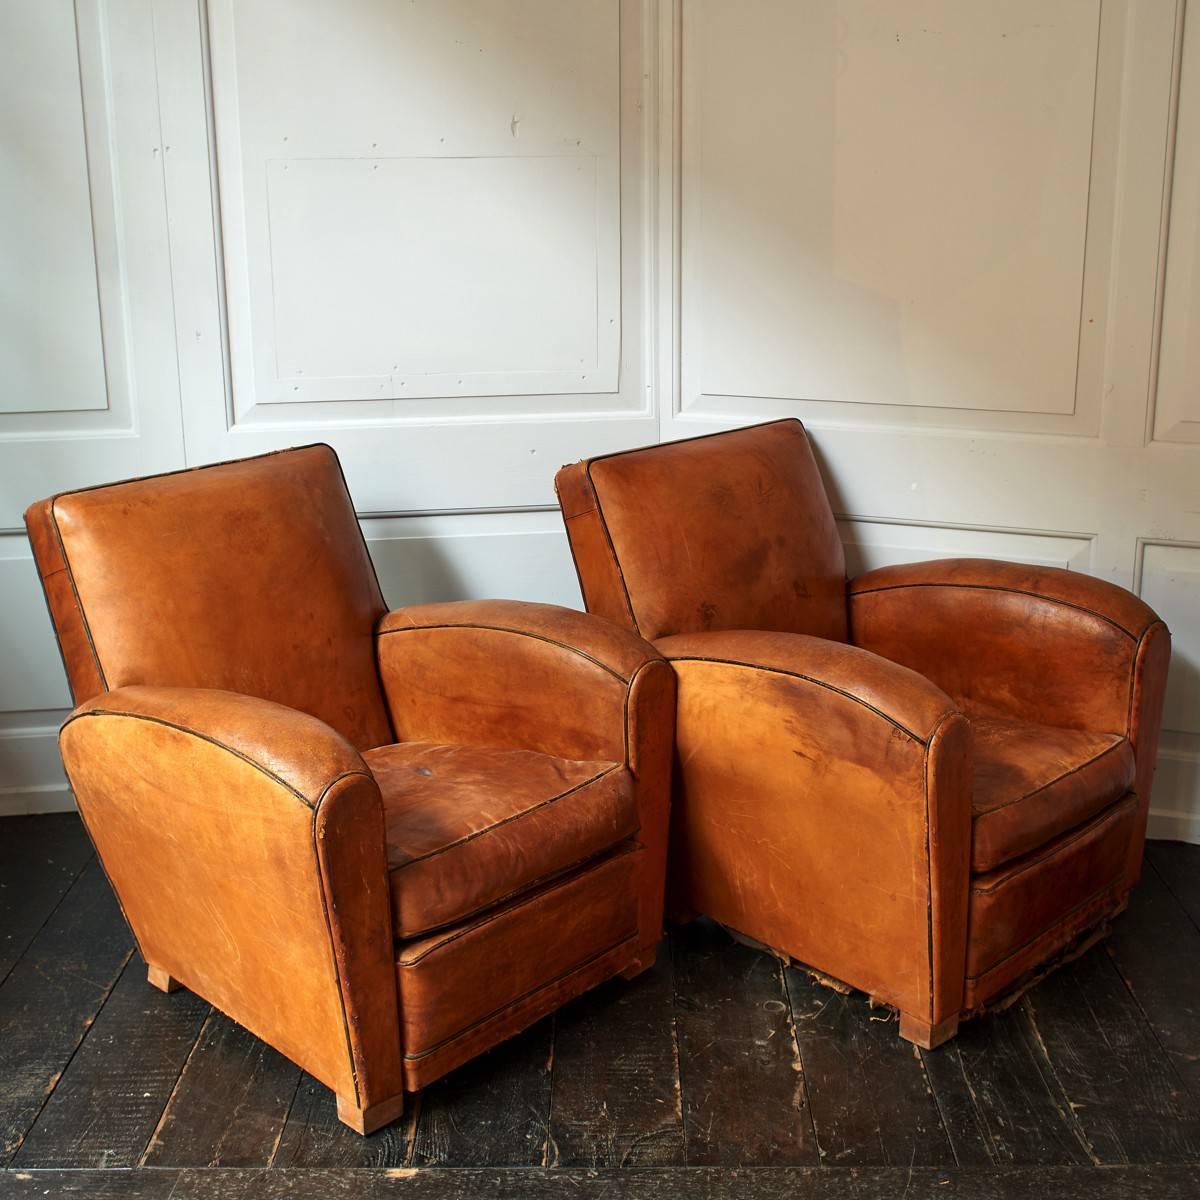 Fauteuil confortable of French origin. The distressed, soft leather chairs feature small tears and rips as you would expect from a pair of chairs of this age. Springs loose underside.